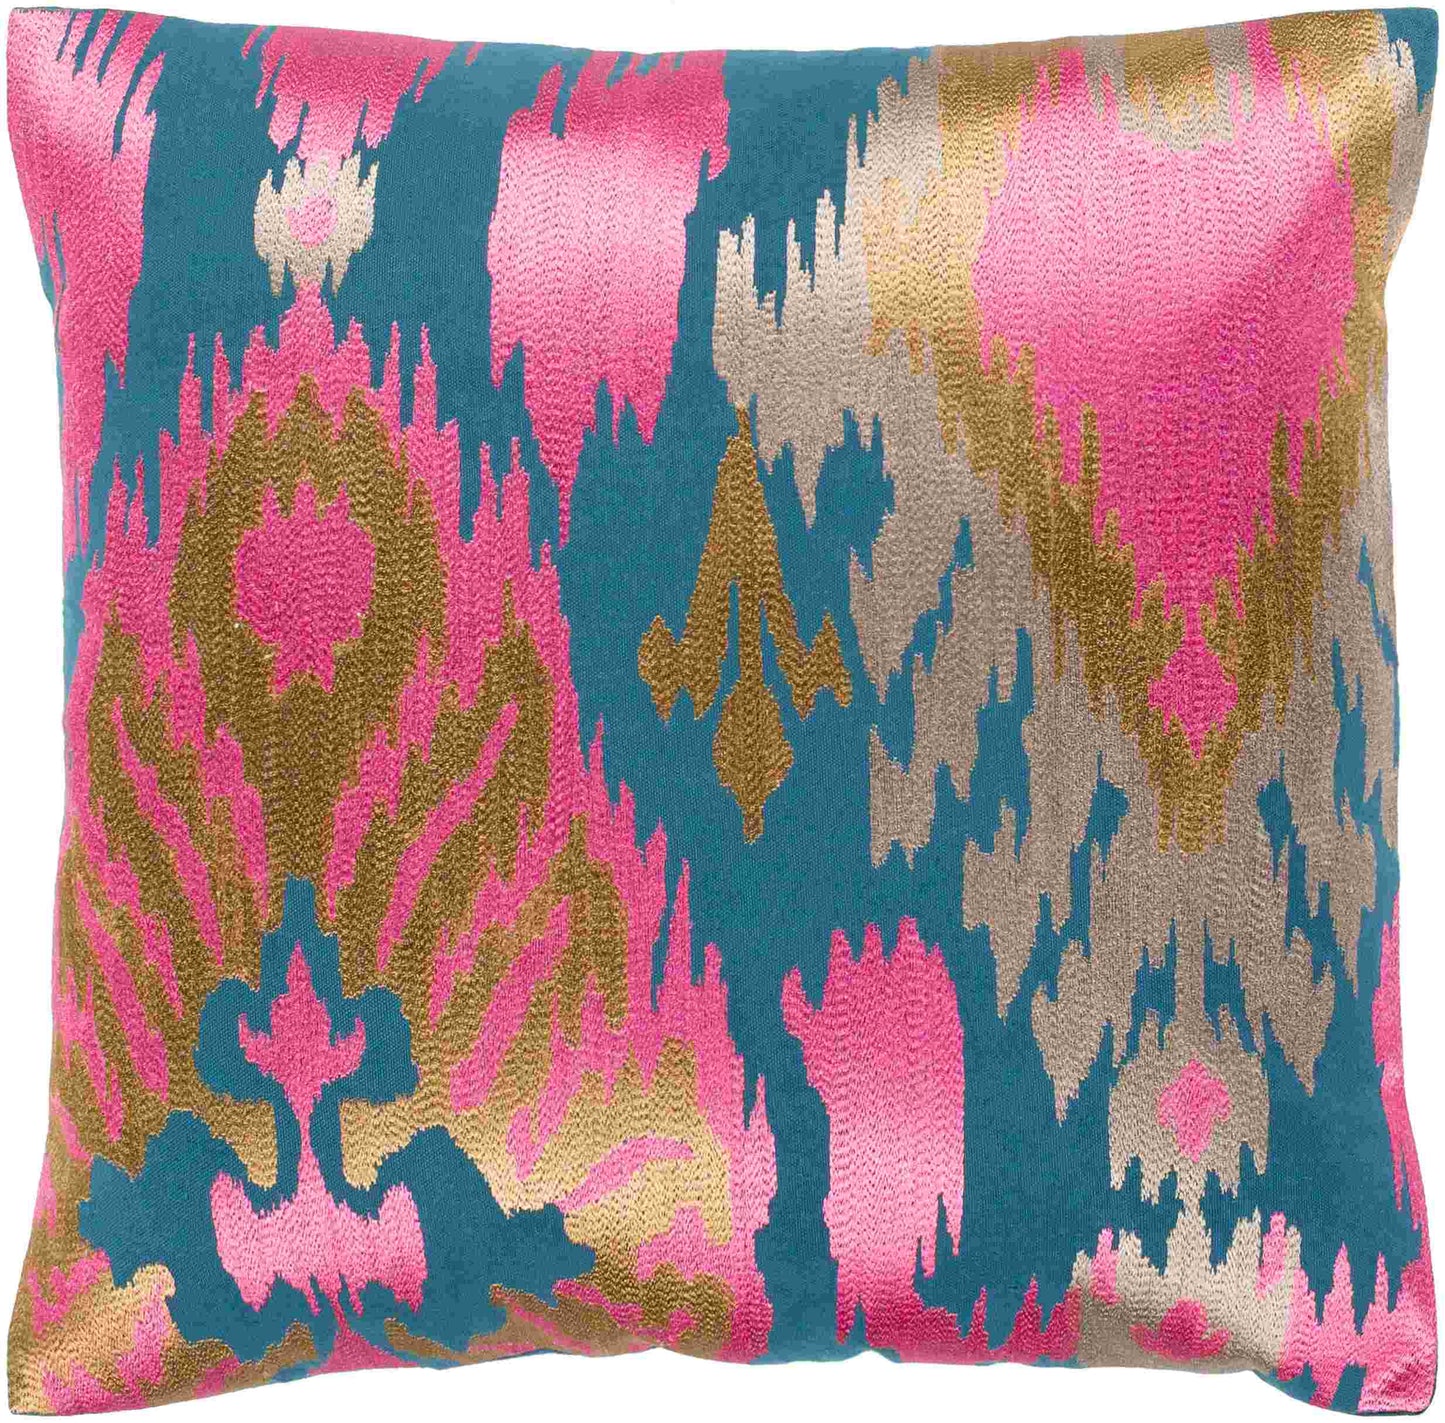 Mons Bright Pink Pillow Cover